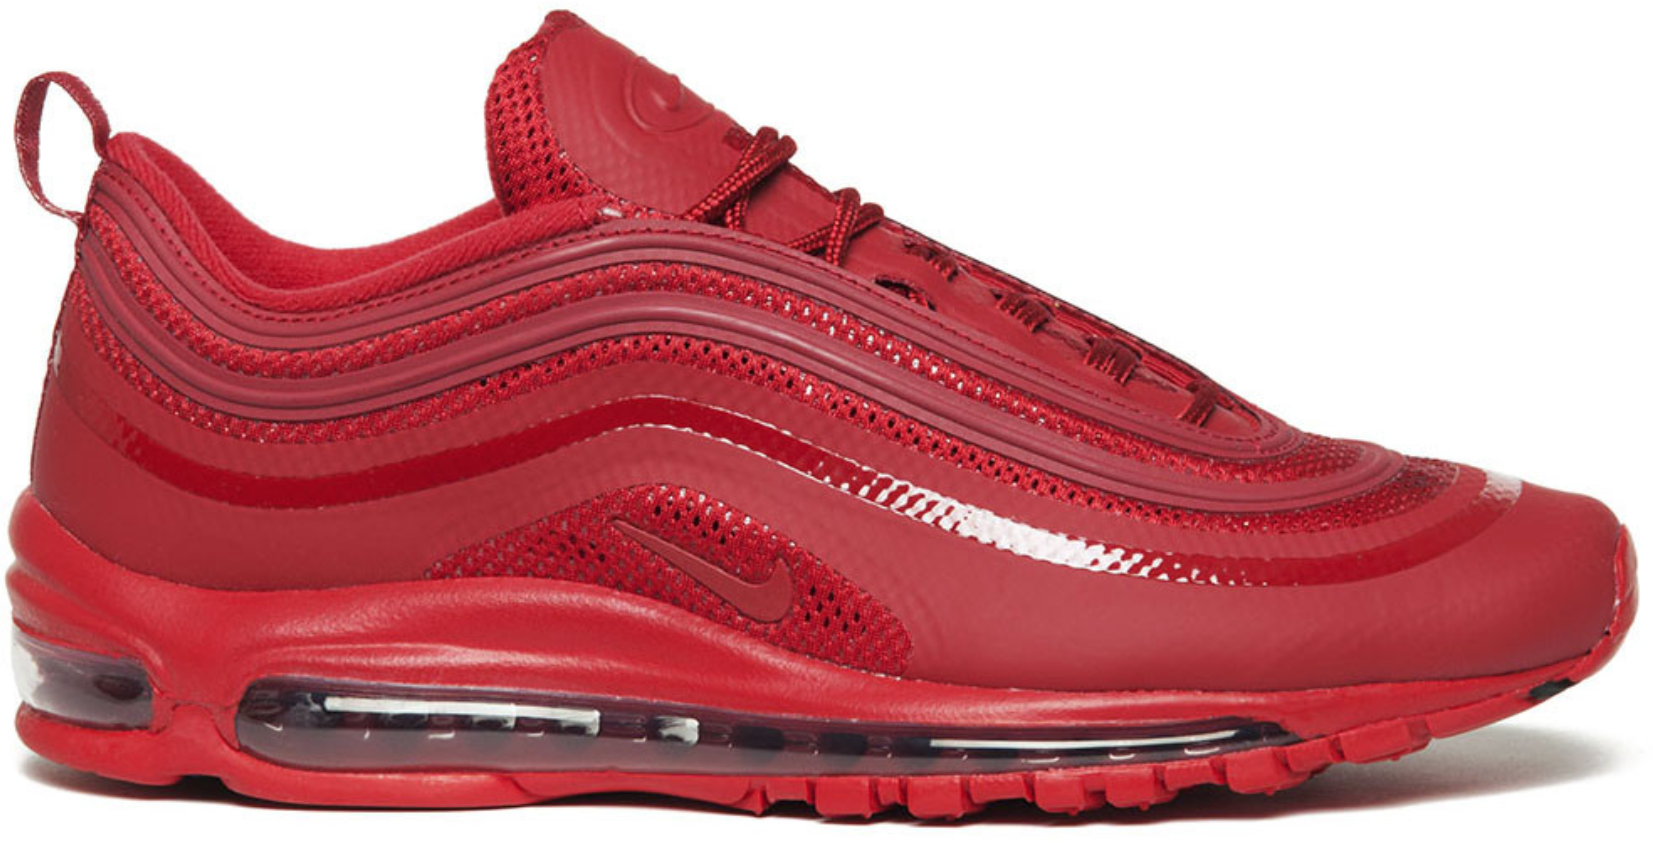 air max 97 hyperfuse size 6